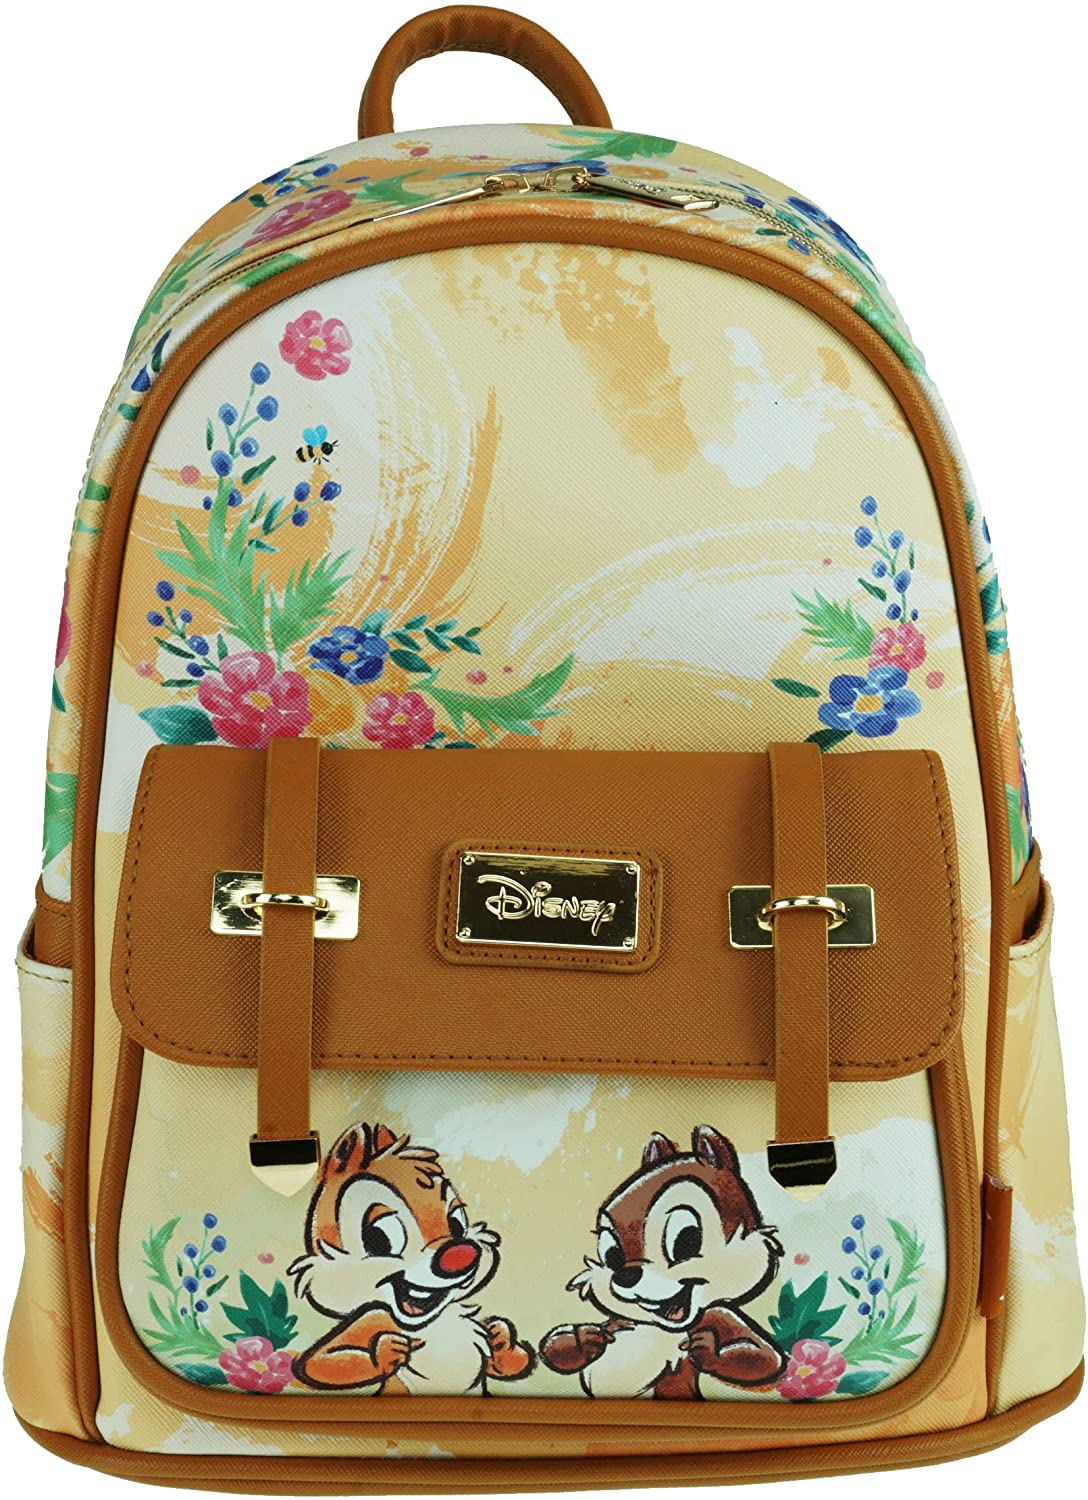 Chip 'n' Dale 11" Vegan Leather Mini Backpack - A21776 - GTE Zone